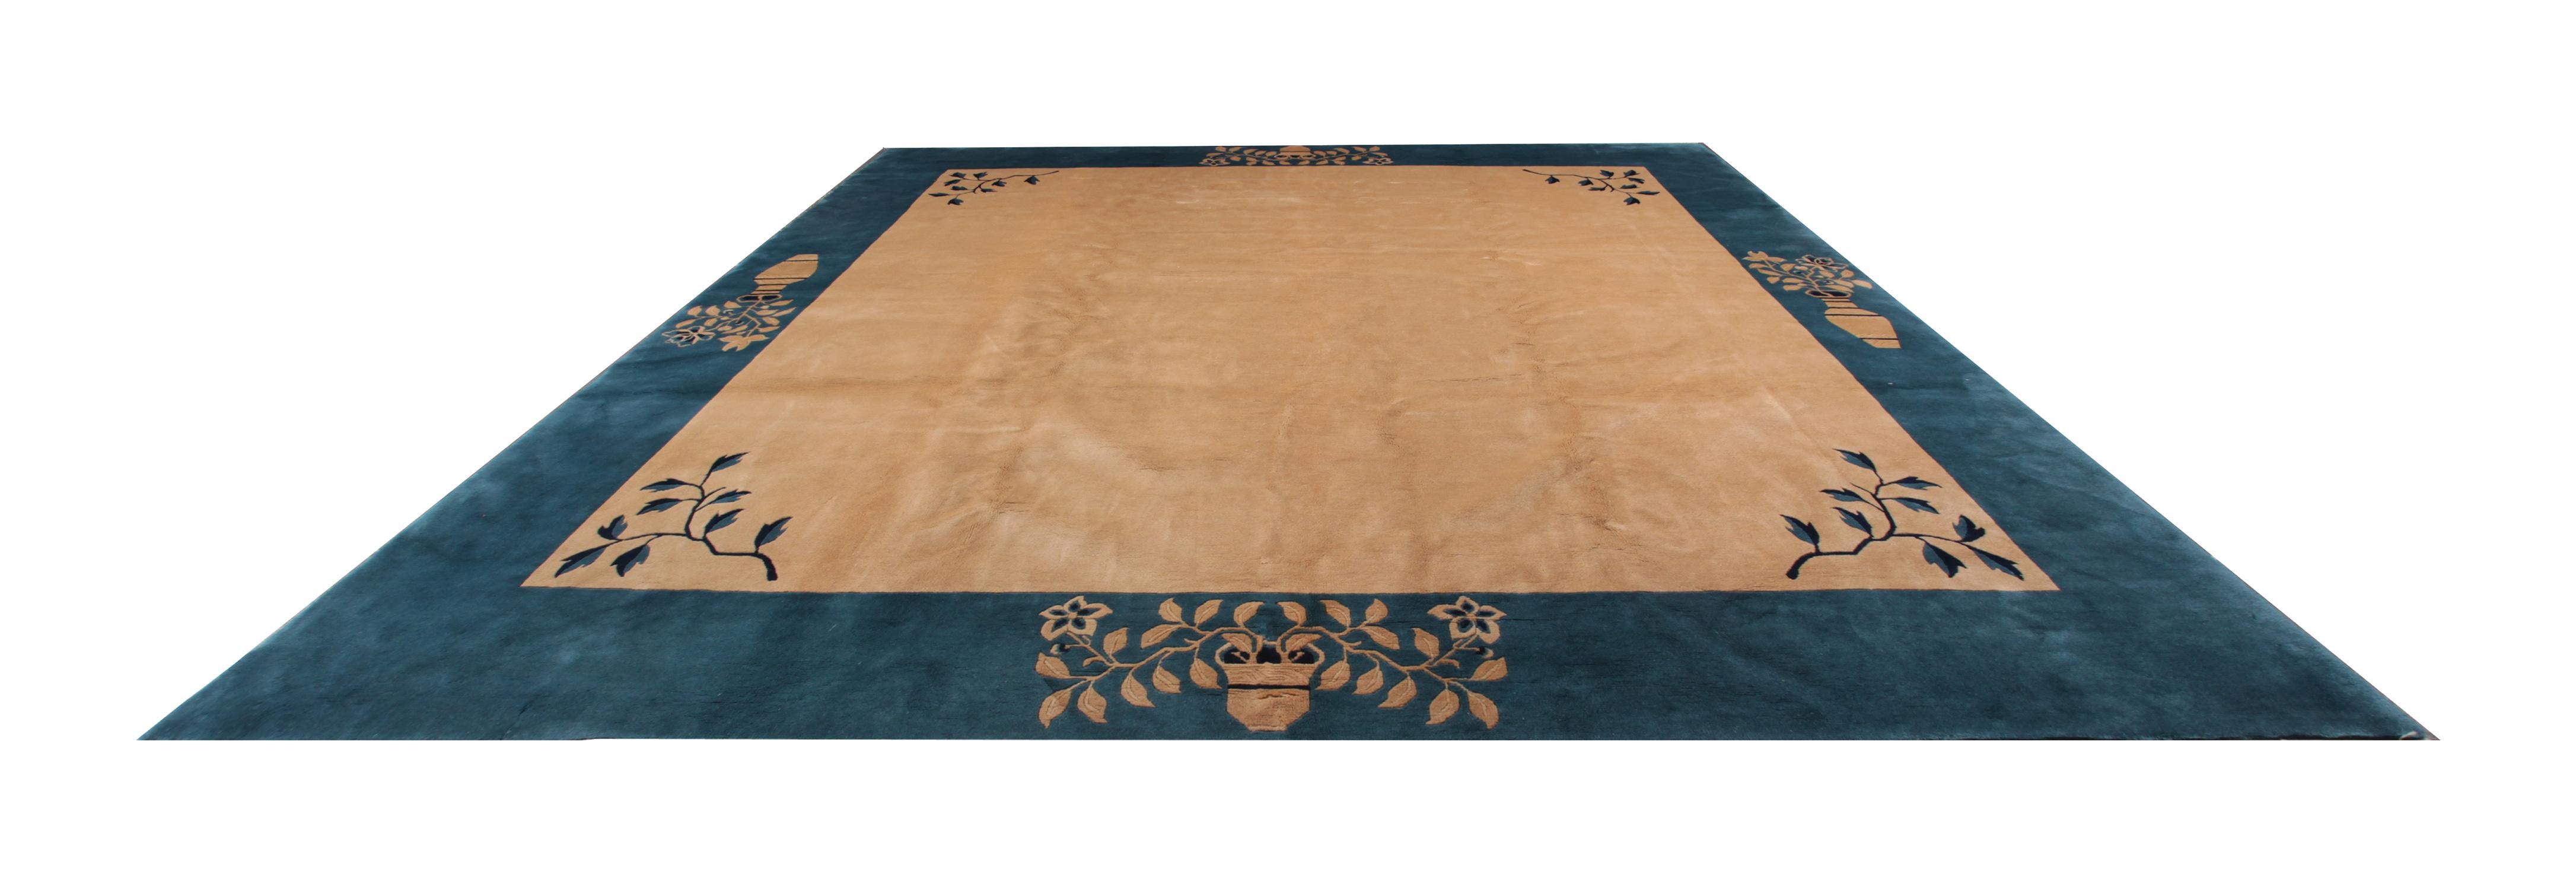 This wool rug is one the unusual rugs of the 1920s which are Art Deco rugs in the most excellent condition with Ivory background color contrasting the turquoise blue or shadow of navy in border and the motives. This patterned rug is a combination of